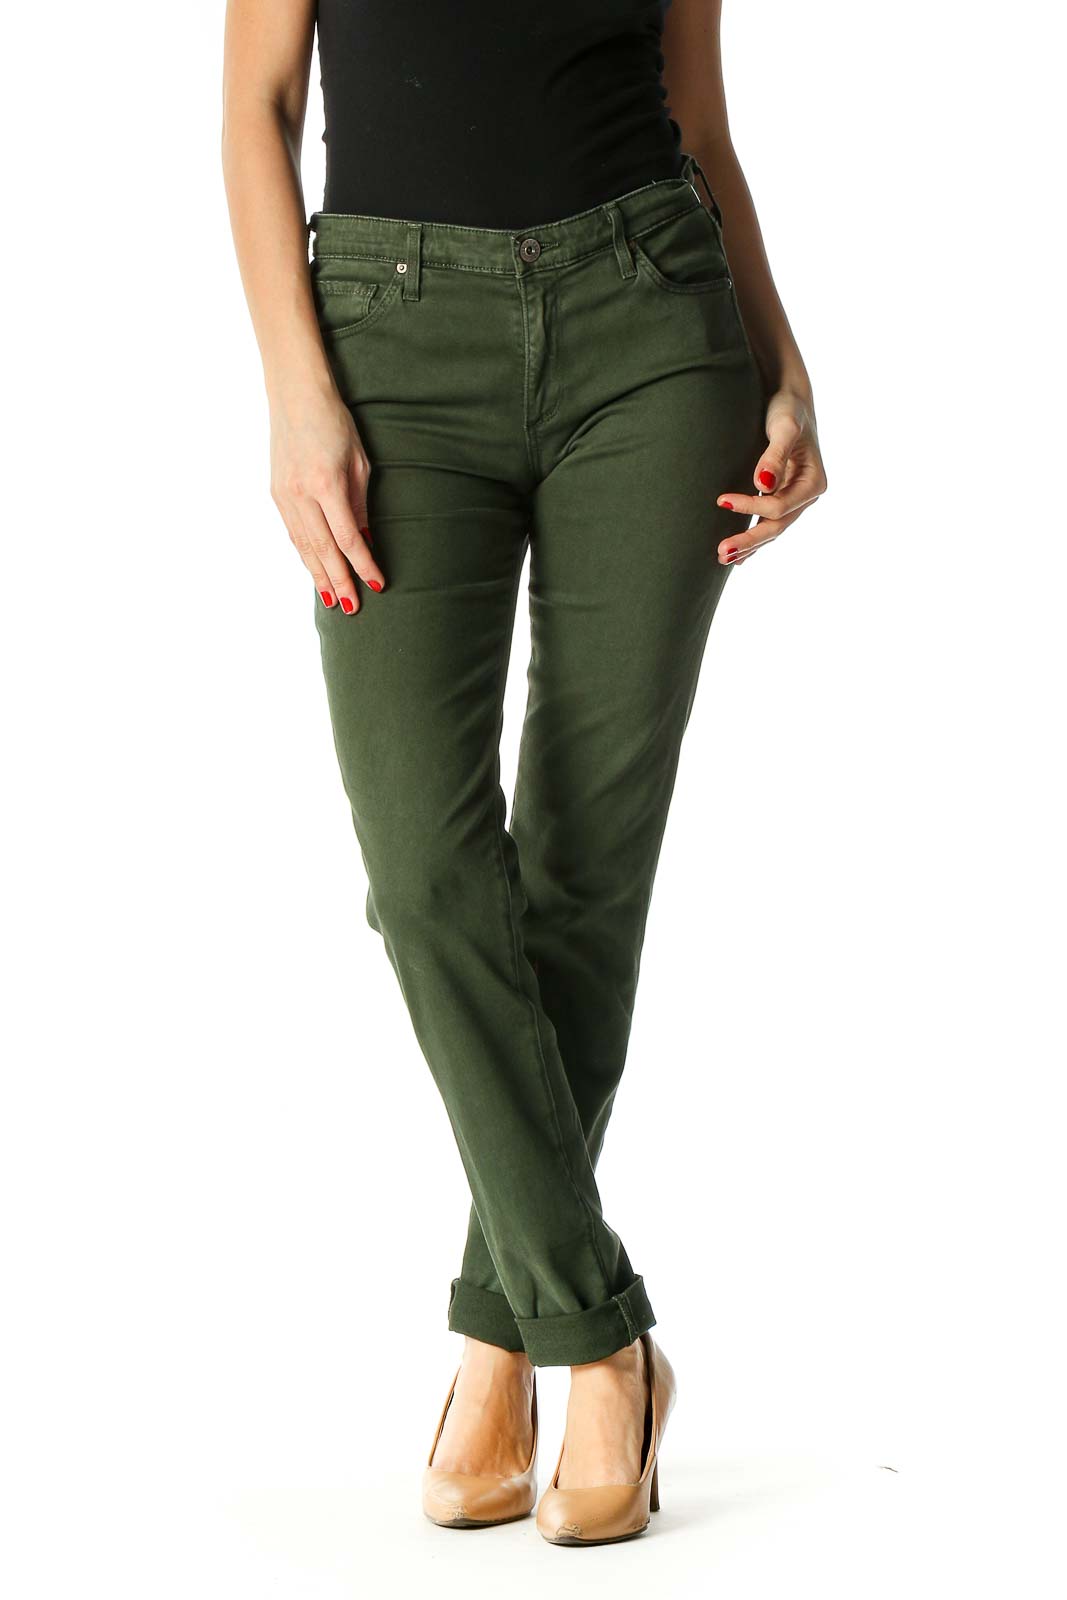 Green Casual Skinny Jeans Front